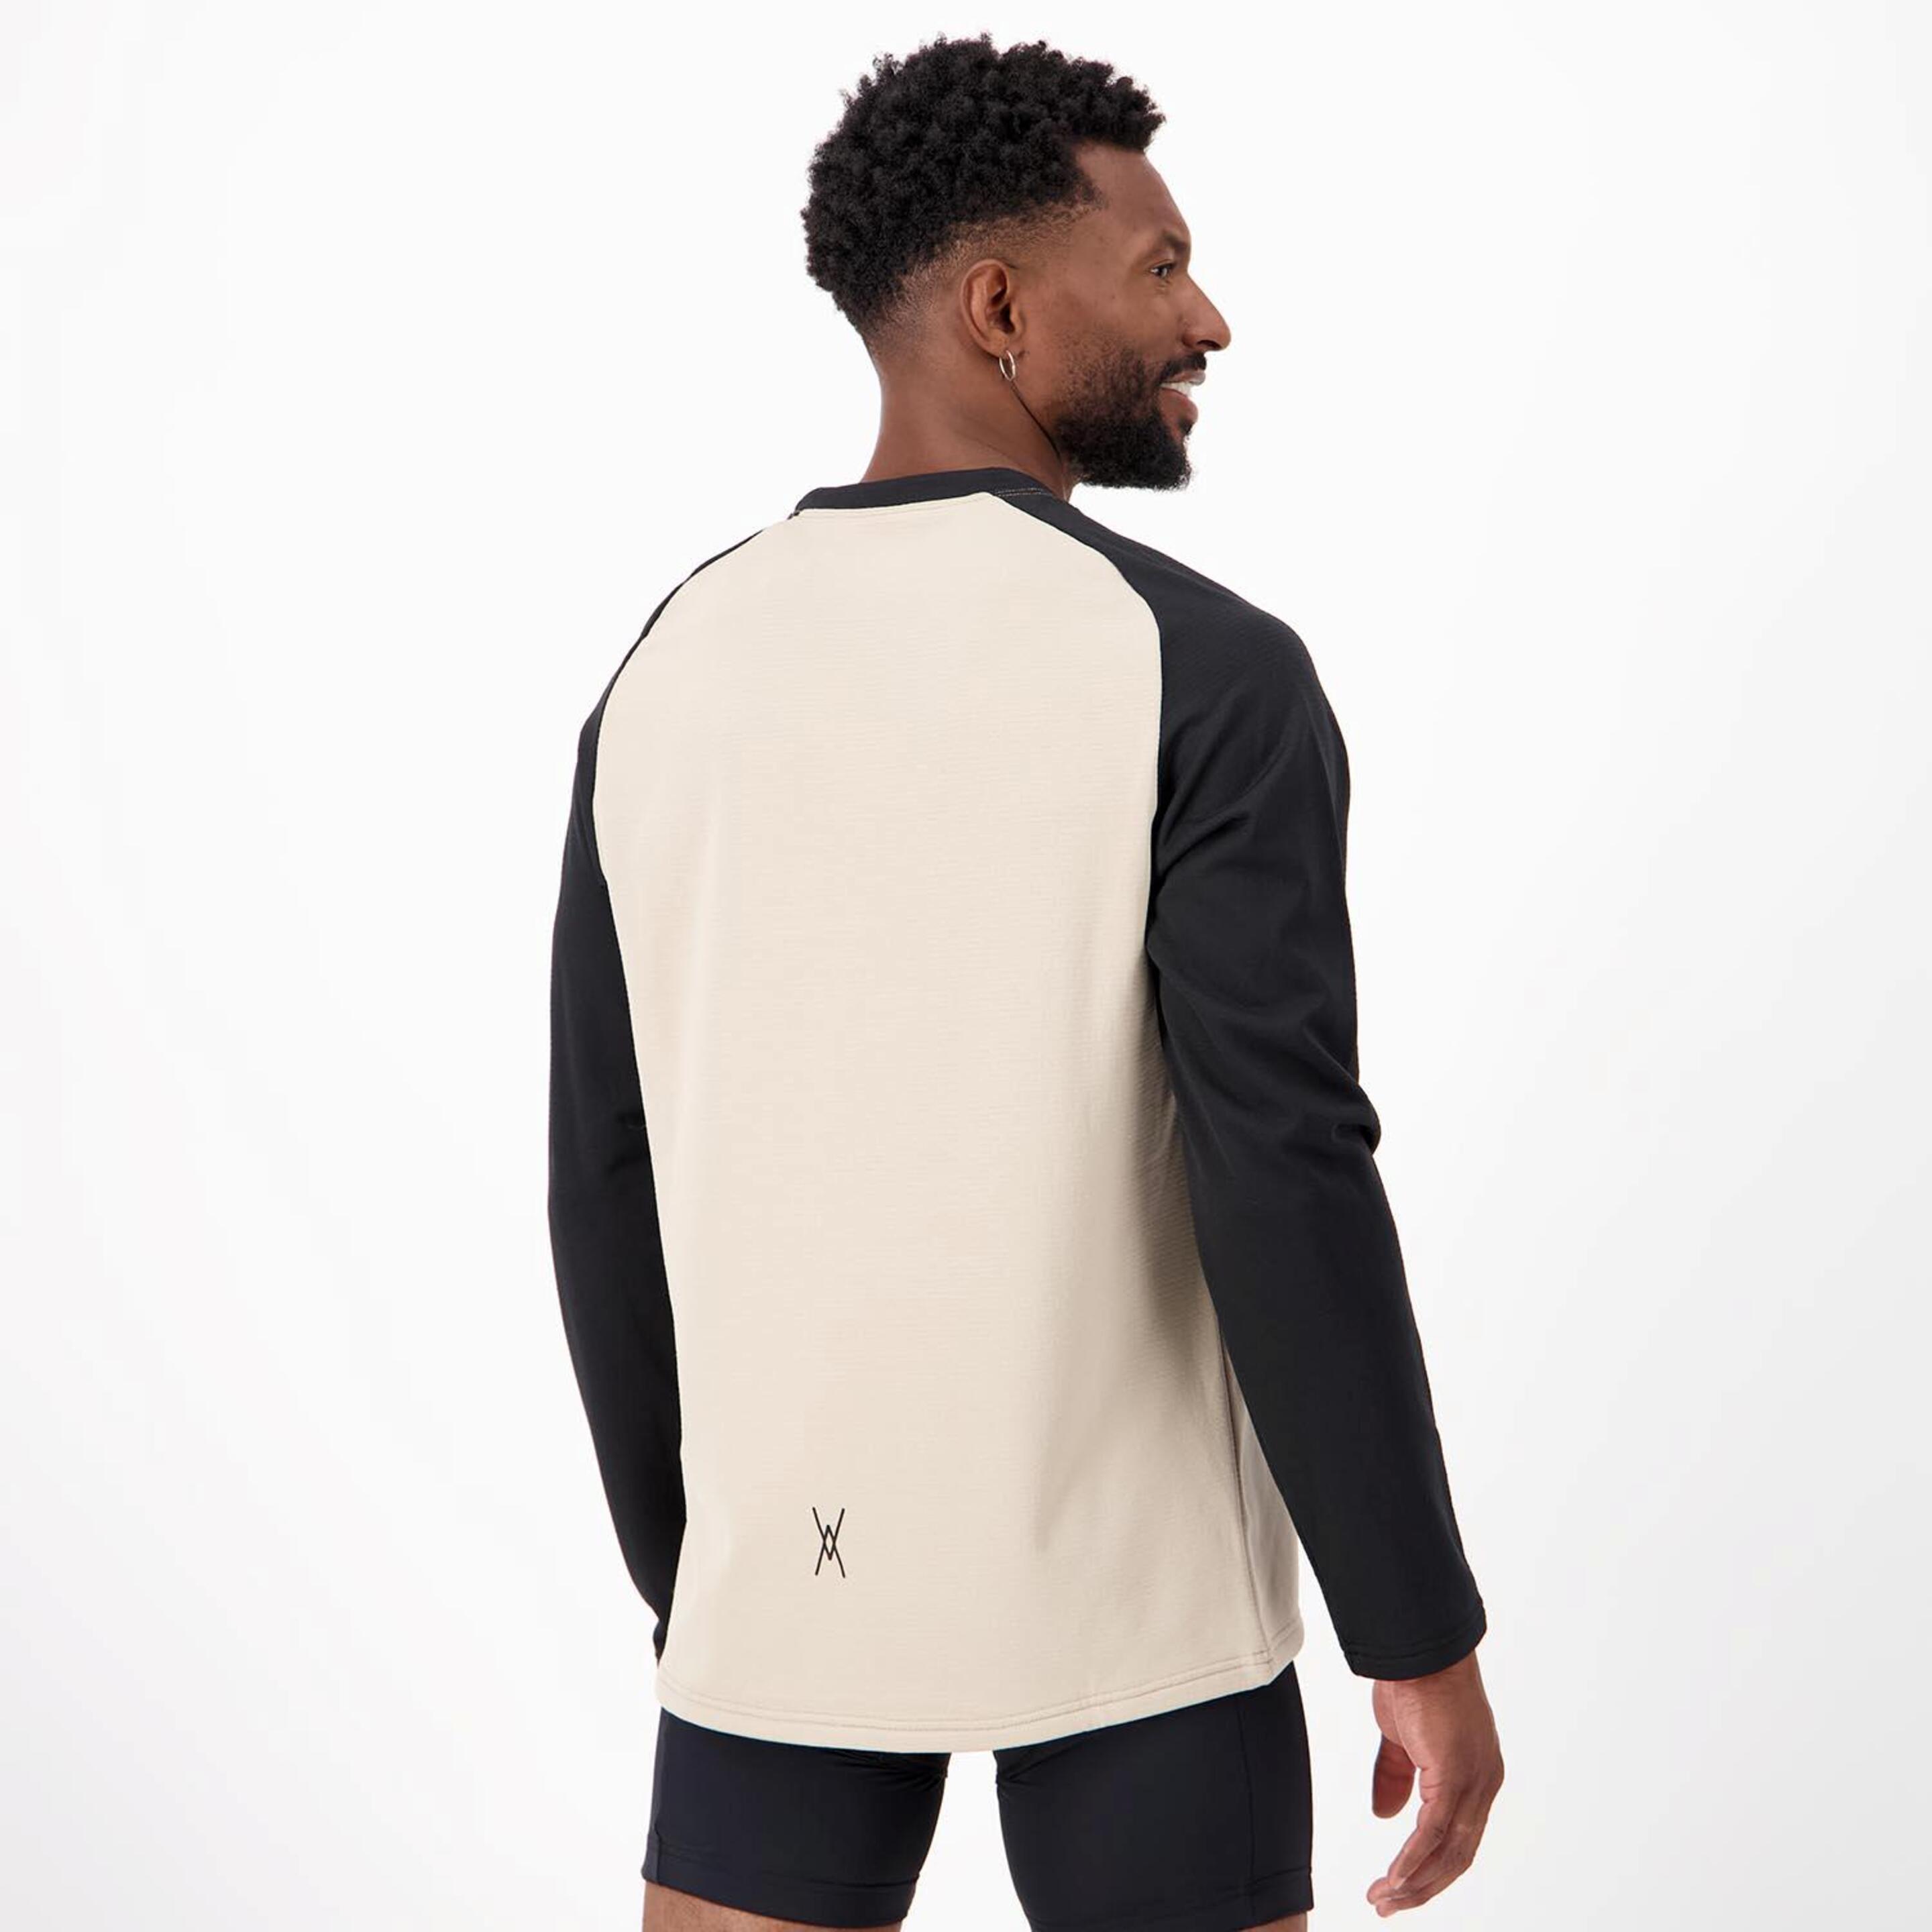 Spiuk All - Beige - Maillot Ciclismo Hombre